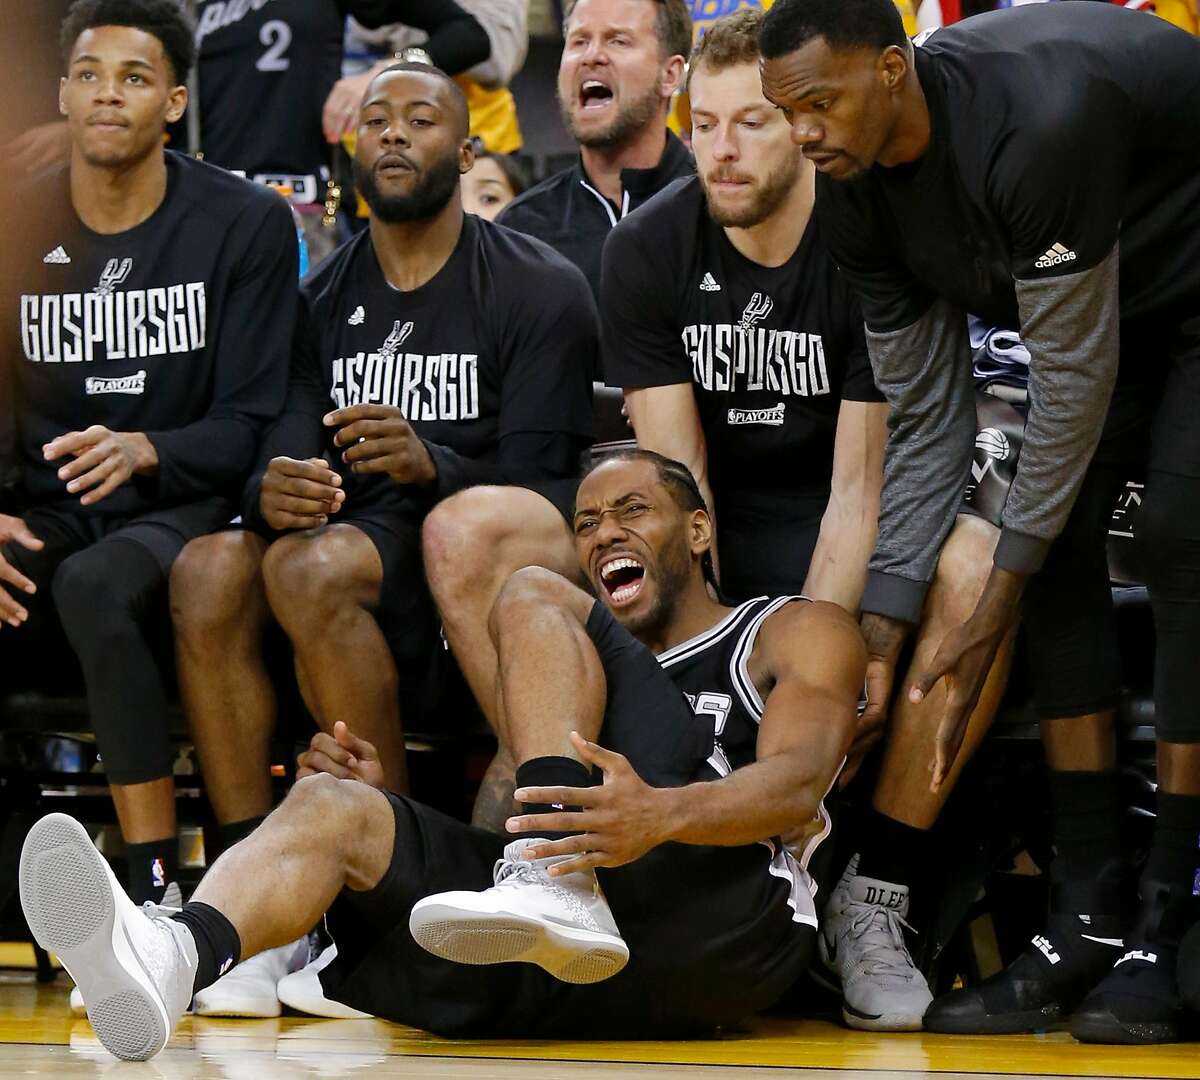 San Antonio Spurs' Kawhi Leonard reacts after being injured on a play during second half action of Game 1 in the Western Conference Finals against the Golden State Warriors Sunday May 14, 2017 at Oracle Arena in Oakland, CA. The Warriors won 113-111.